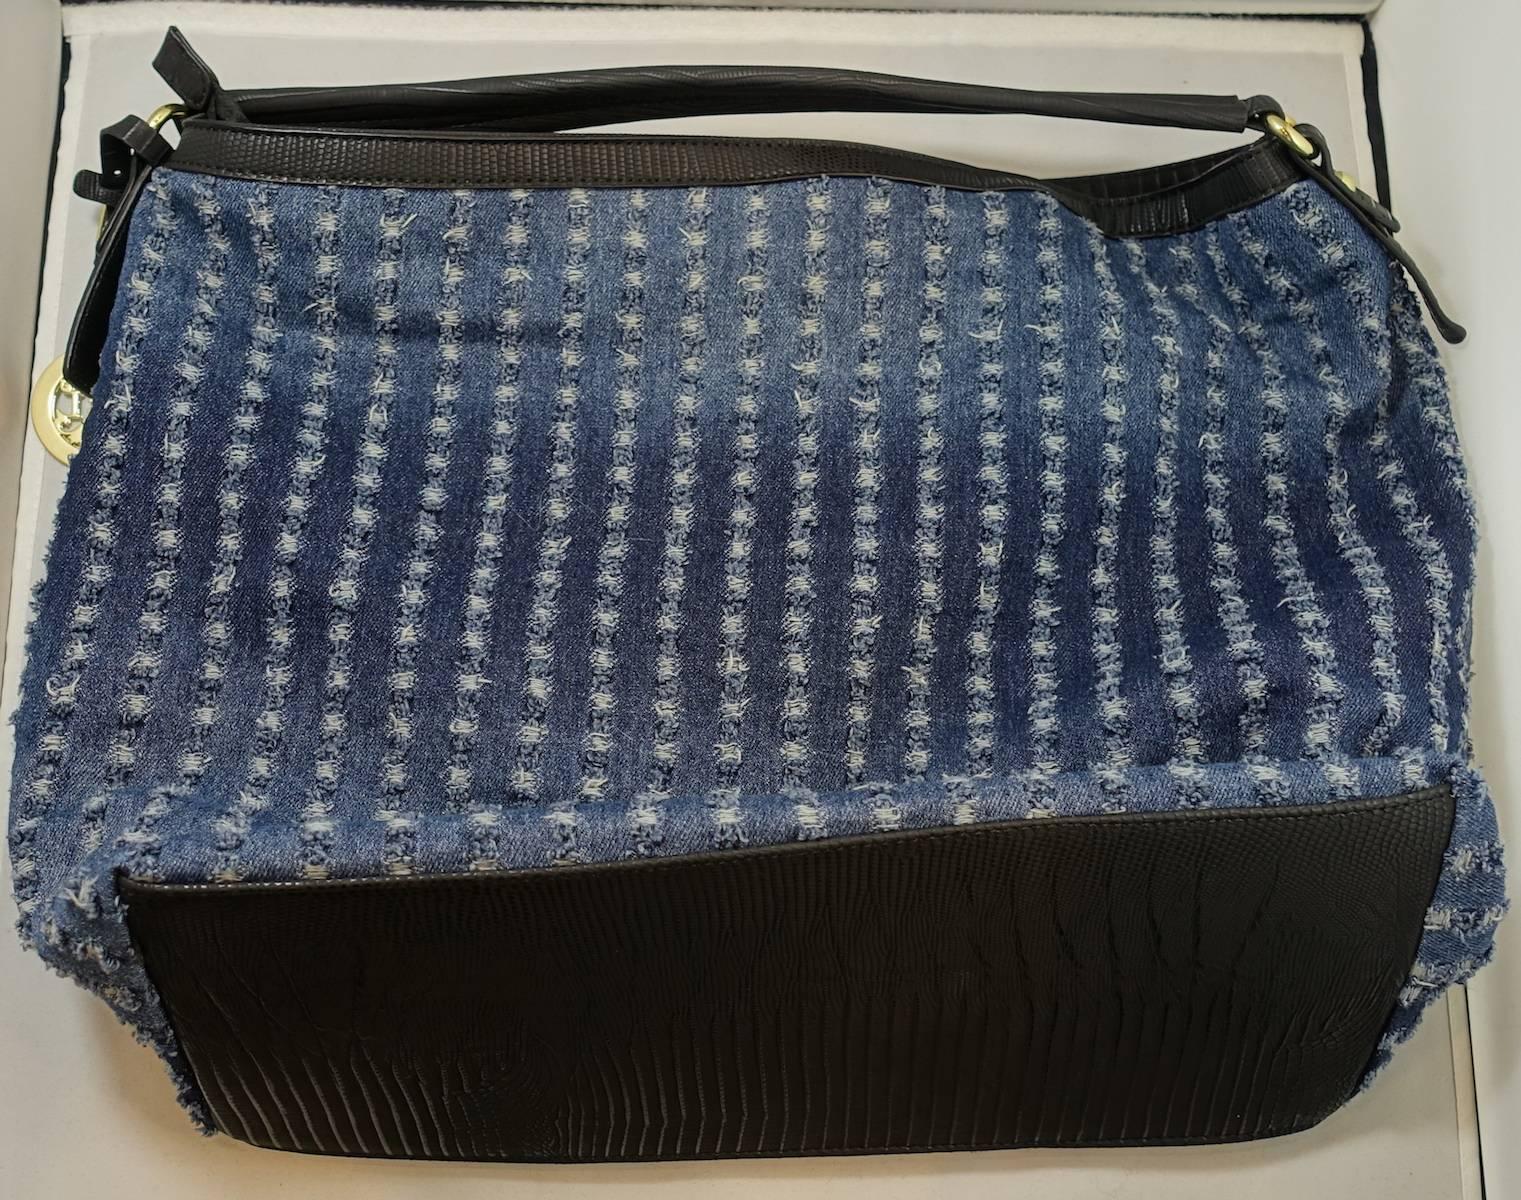 This blue denim bag was designed by Christian LaCroix and has a distressed look to it. The top frame is made of  black leather trim The inside is very spacious and has black and white polka dots. It measures 13” x 18”. The strap measures 14” x 1”.